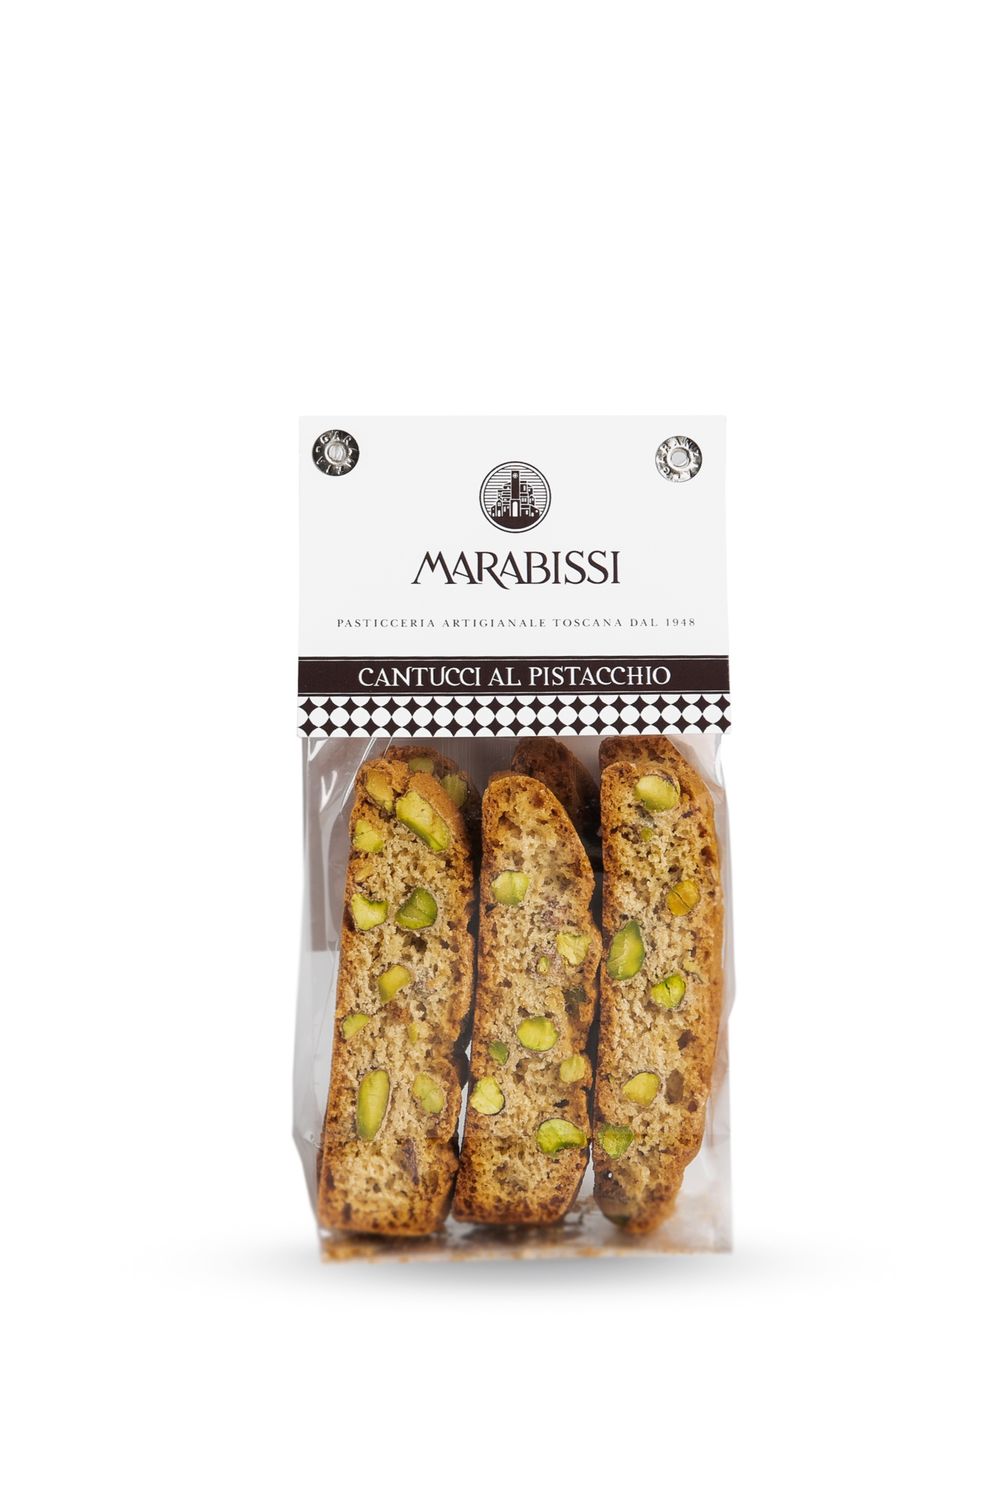 Cantucci with Pistachio